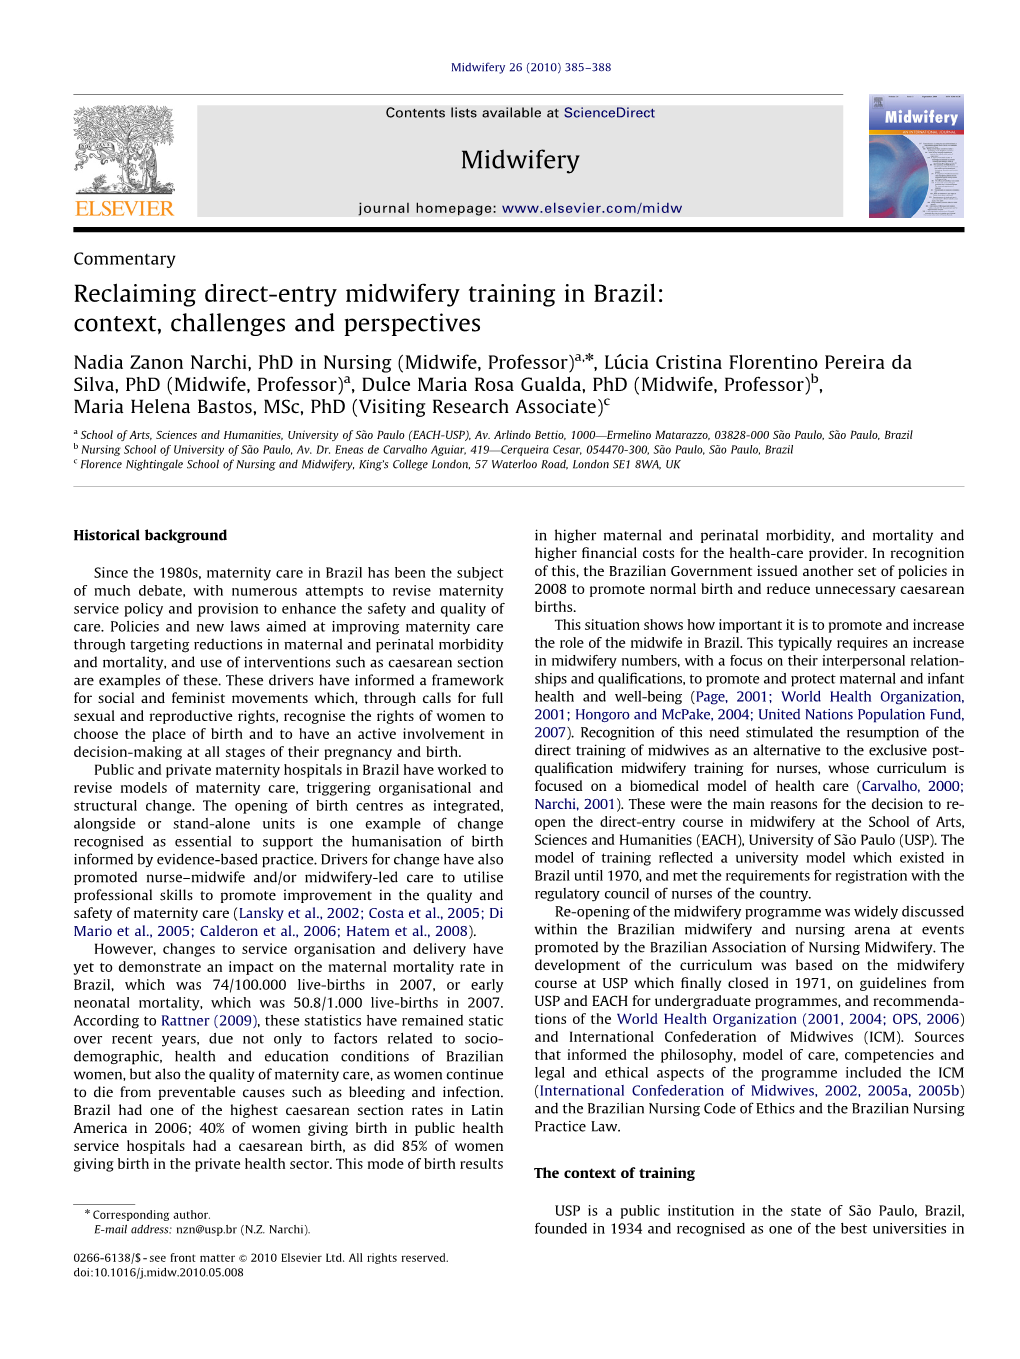 Reclaiming Direct-Entry Midwifery Training in Brazil Context